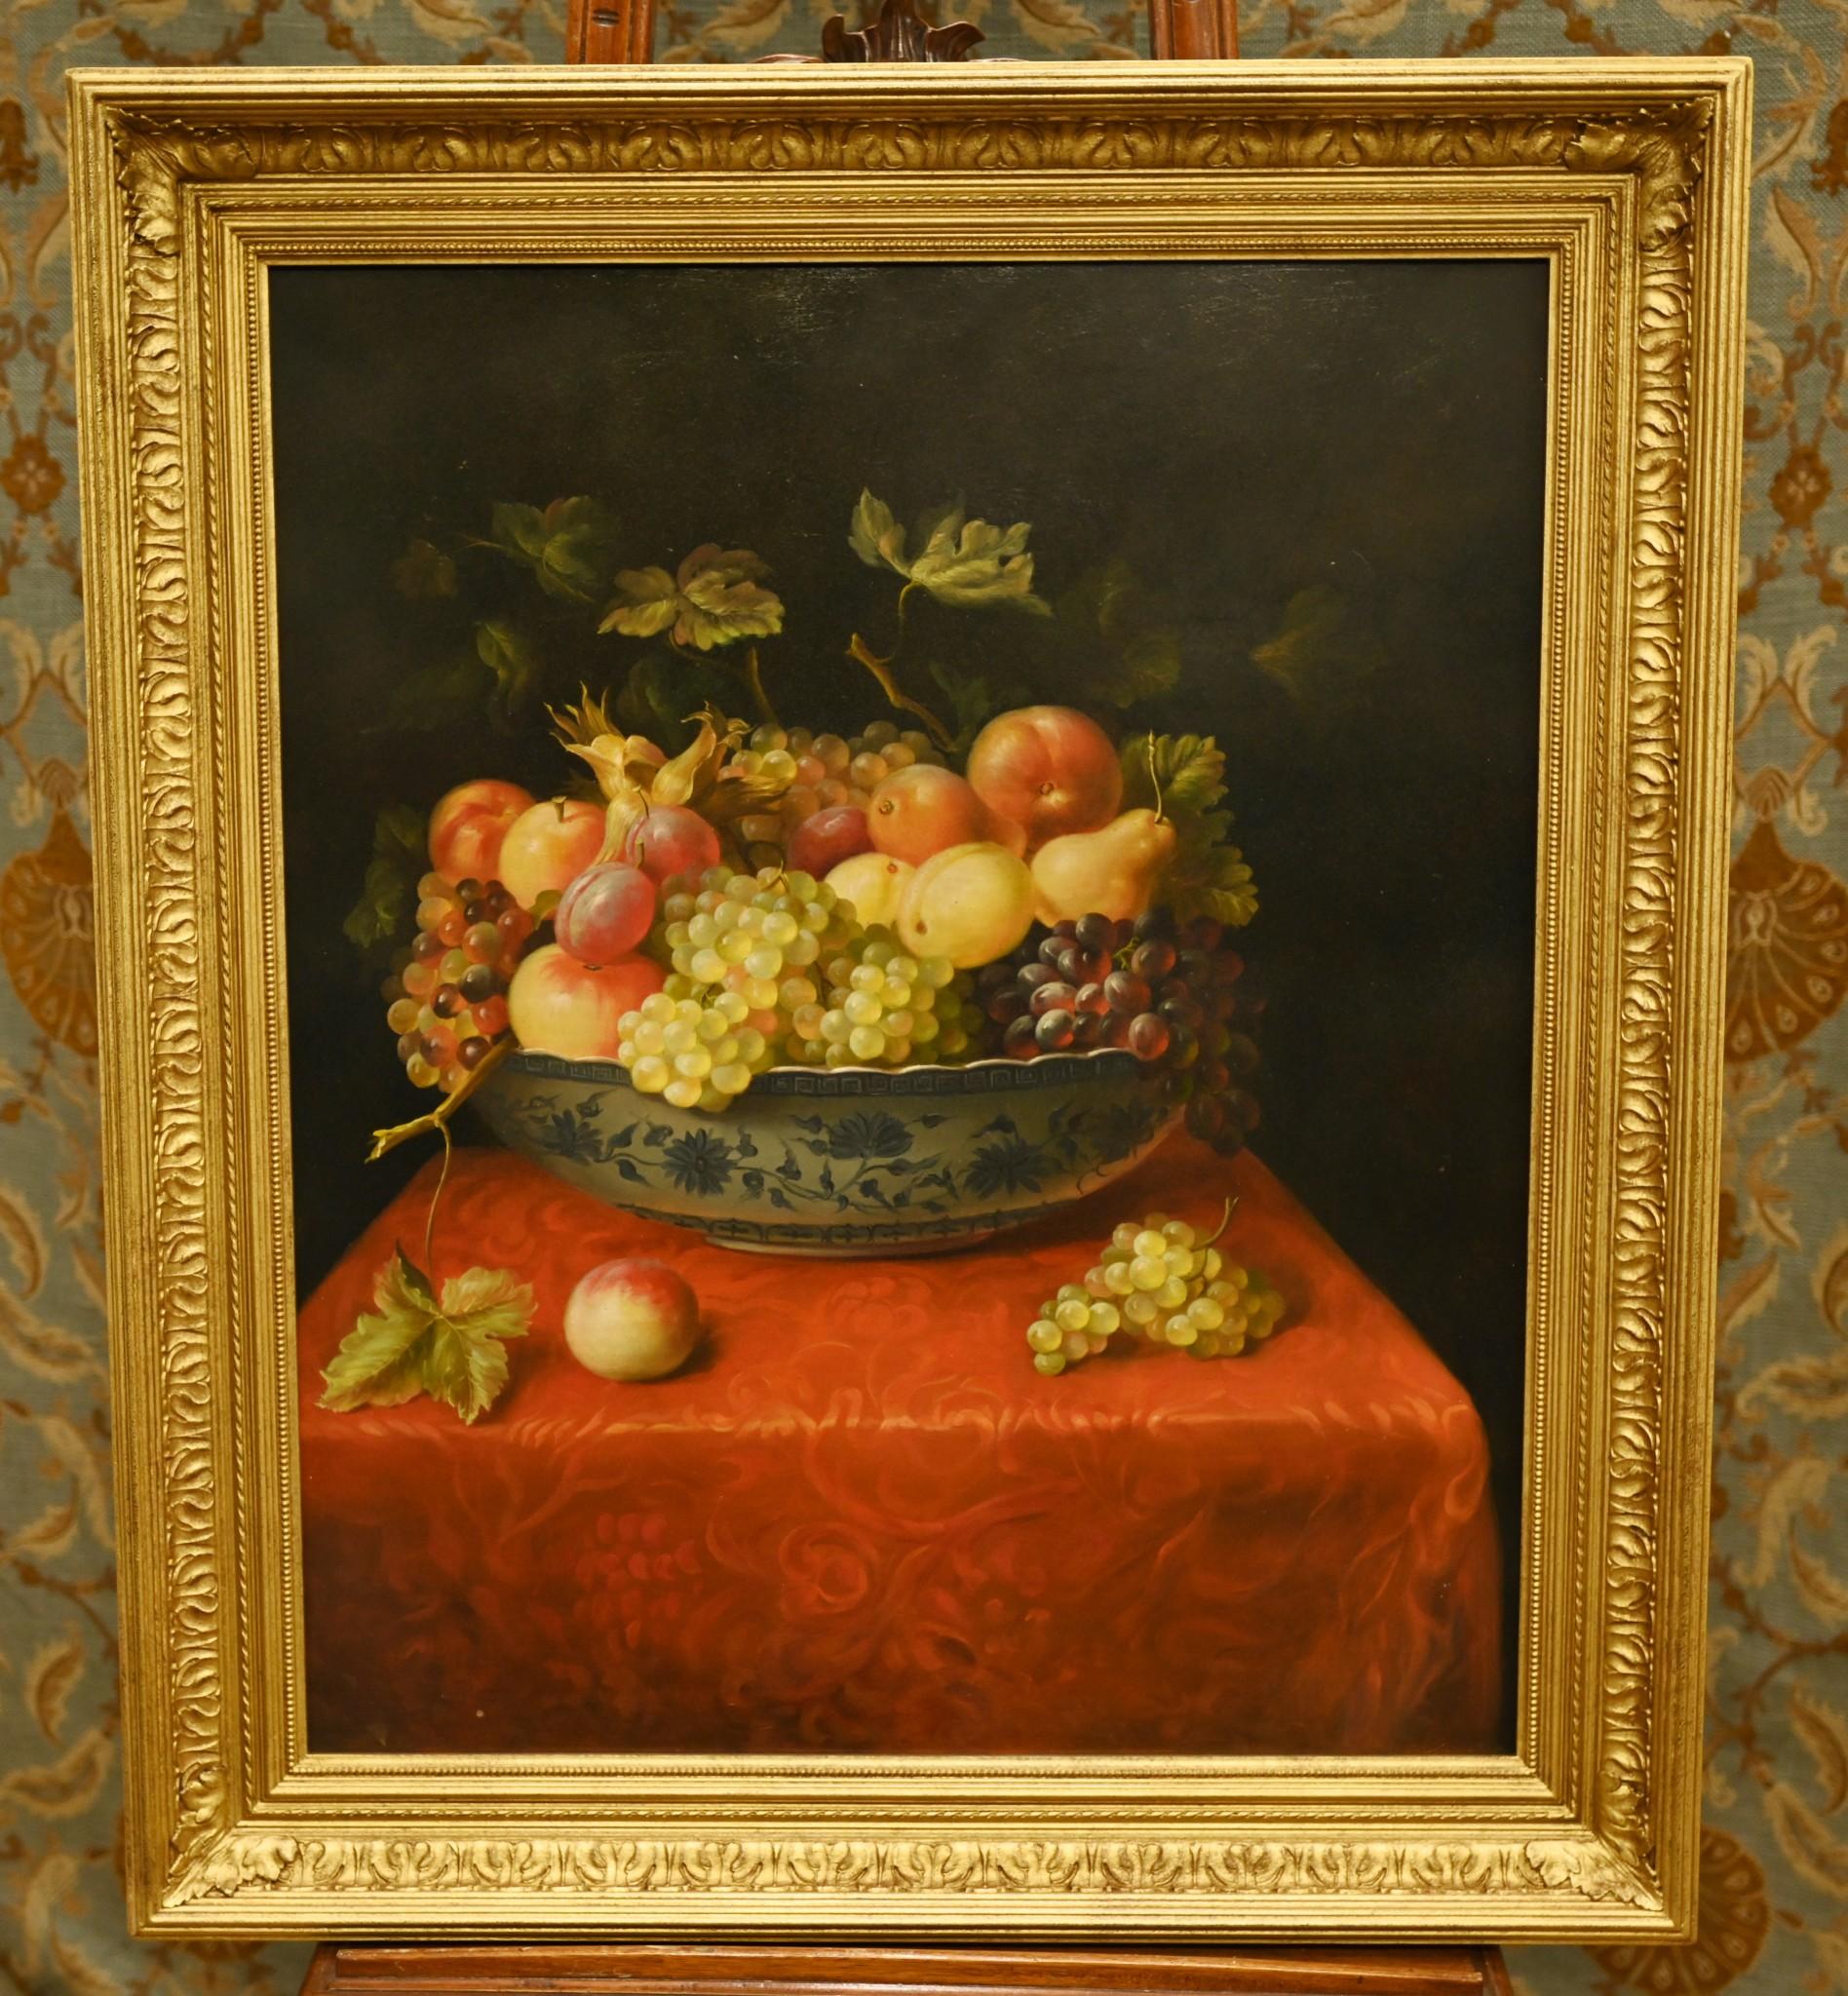 Bright and breezy Italian still life of fruits in a bowl
Artist has really captured the scen with great skill as the fruits are placed in a blue and white porcelain bowl
Love how the grapes have been rendered, such intricate and detailed